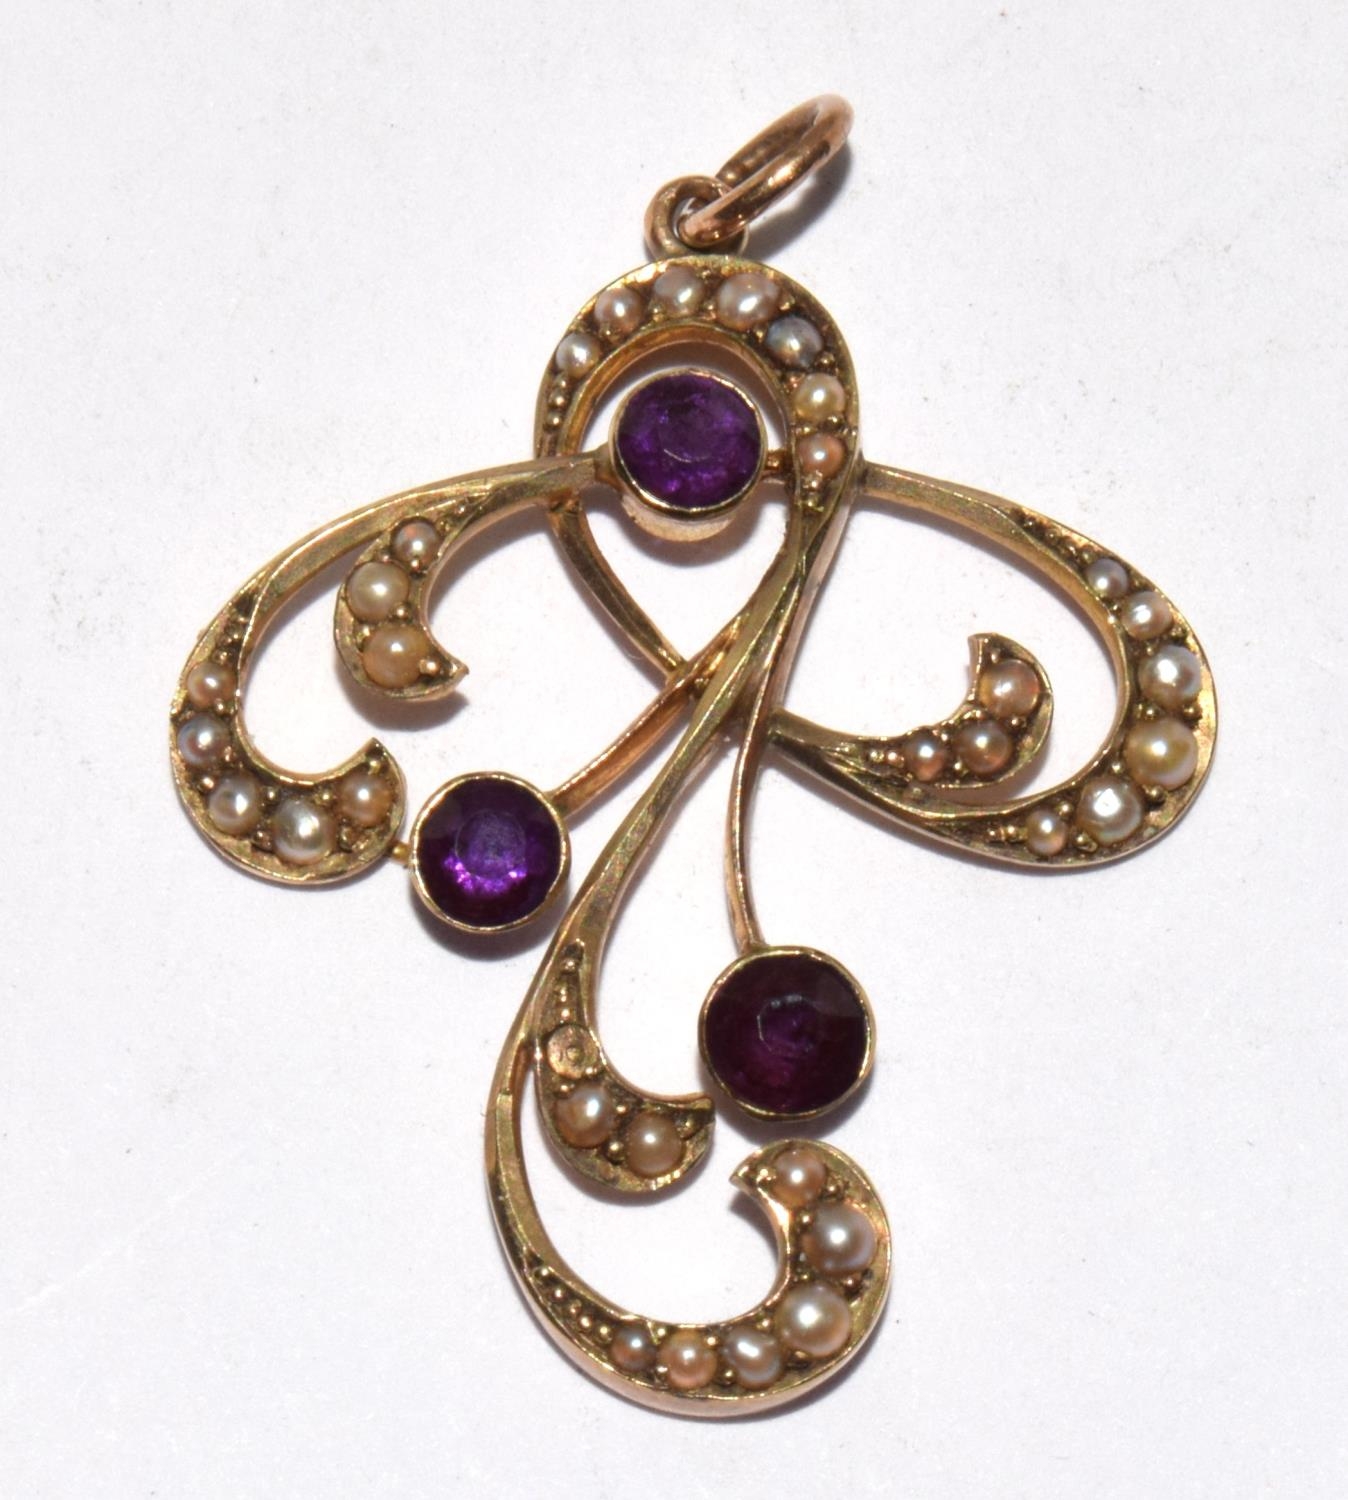 9ct gold vintage Belle Epoque pendant set with Amethyst and Pearls - Image 5 of 5